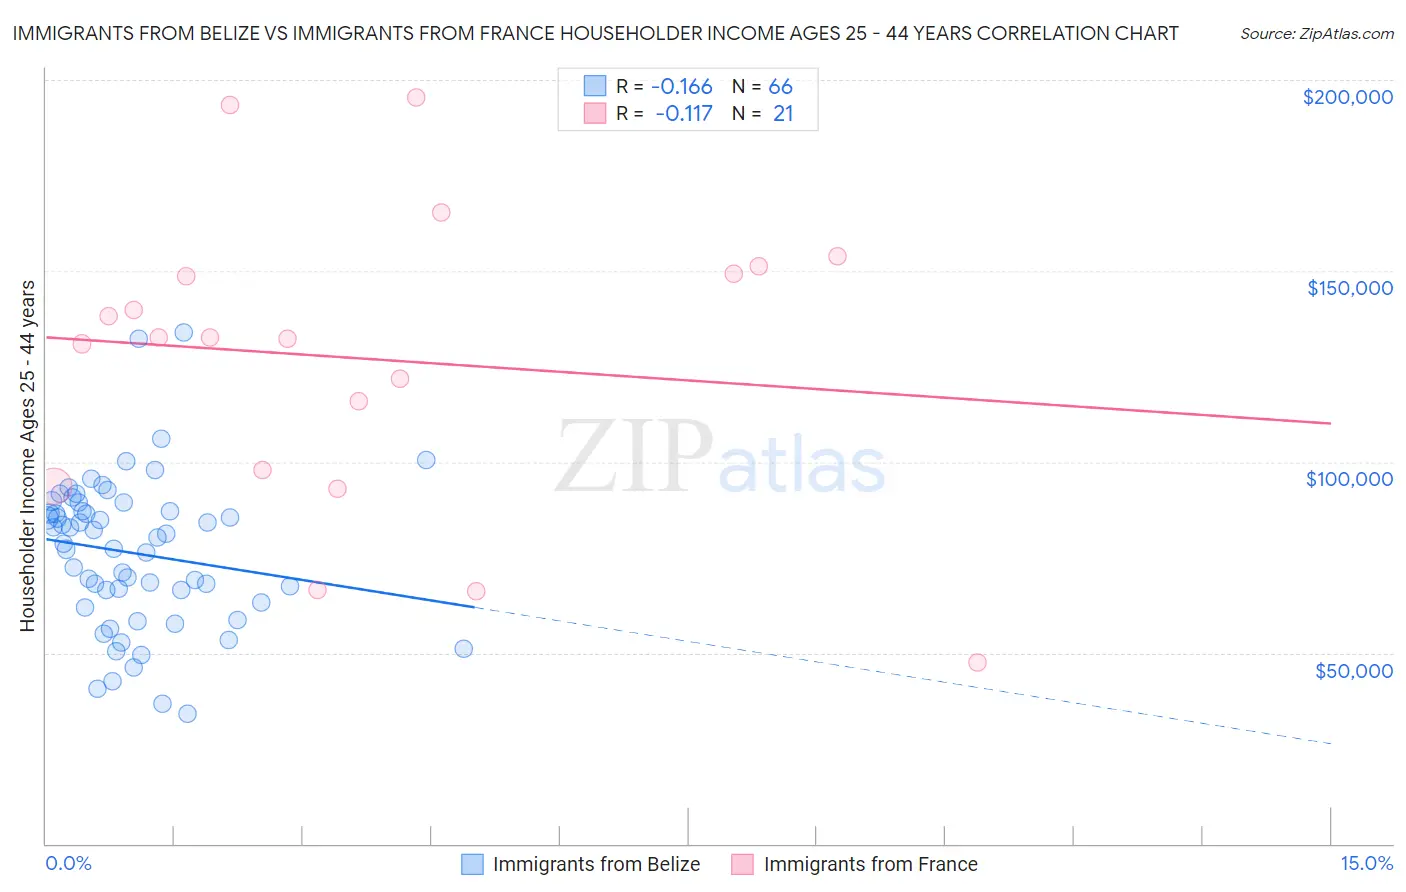 Immigrants from Belize vs Immigrants from France Householder Income Ages 25 - 44 years